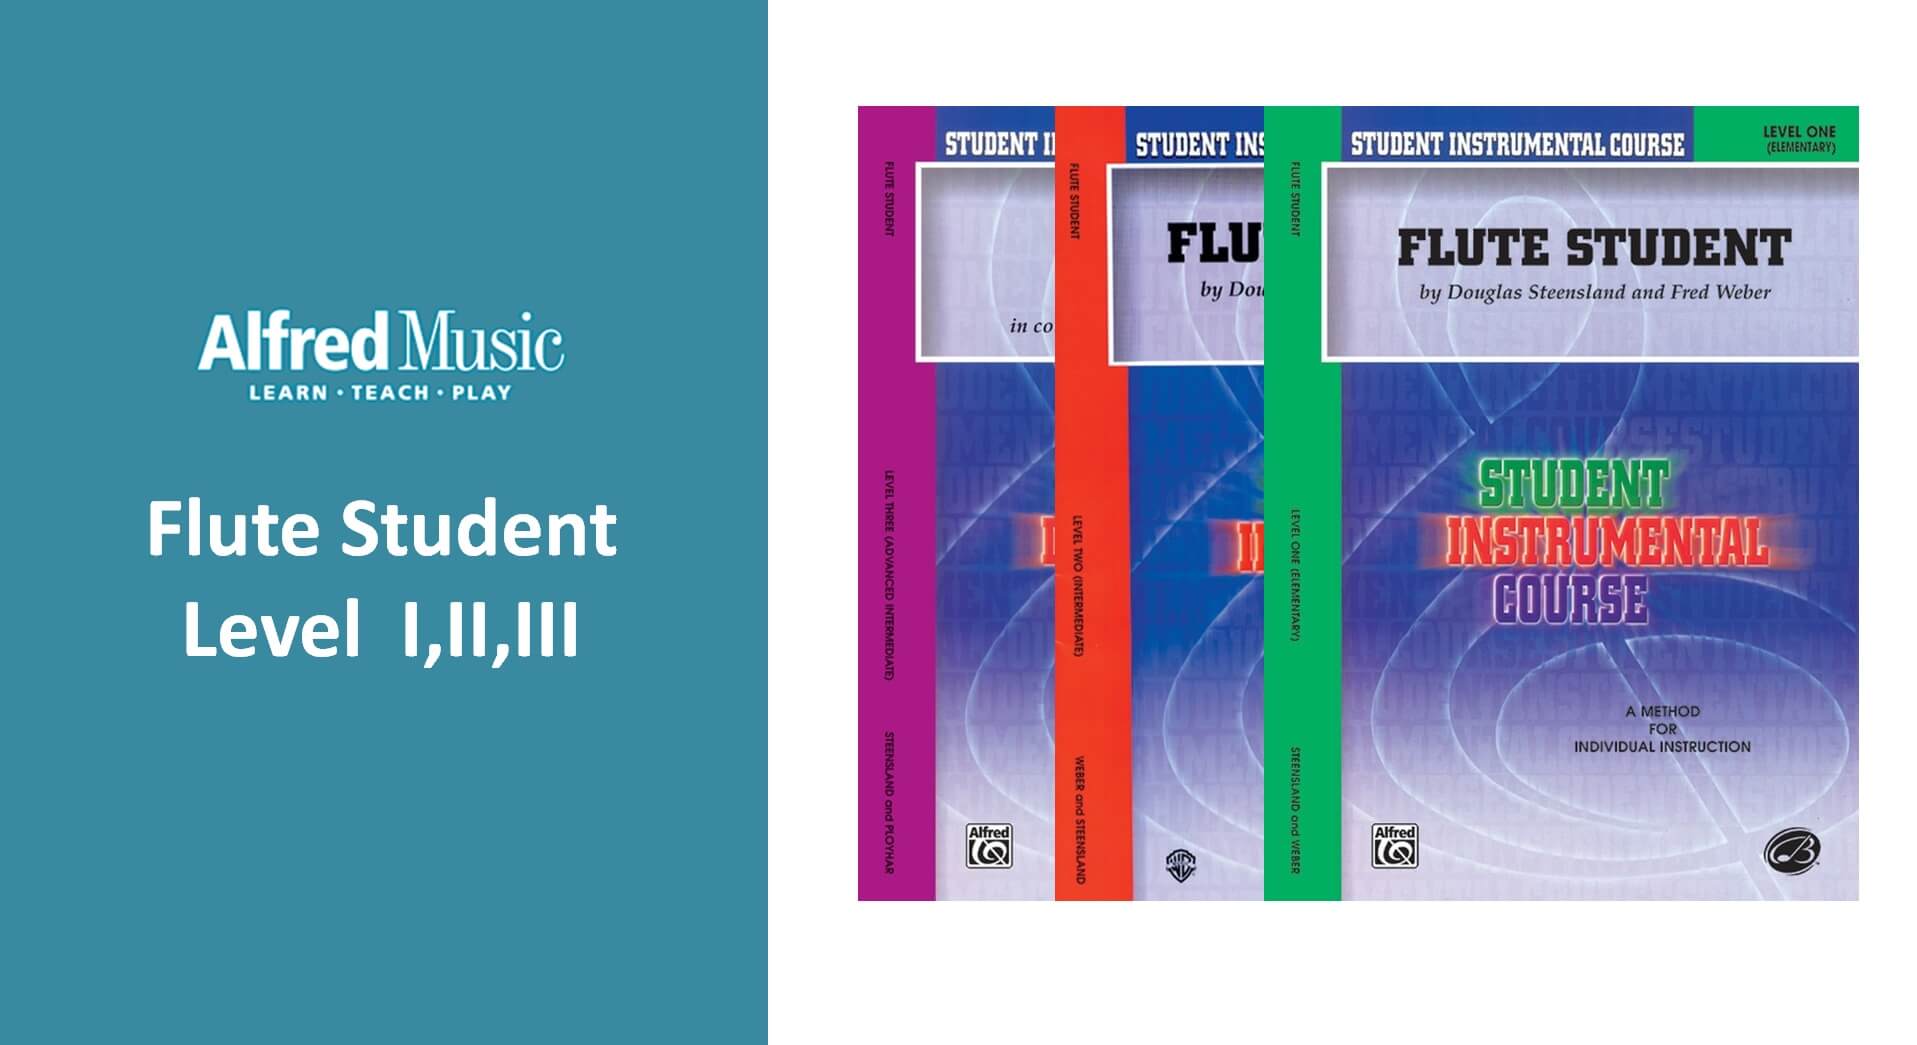 Student Instrumental Course: Flute Student